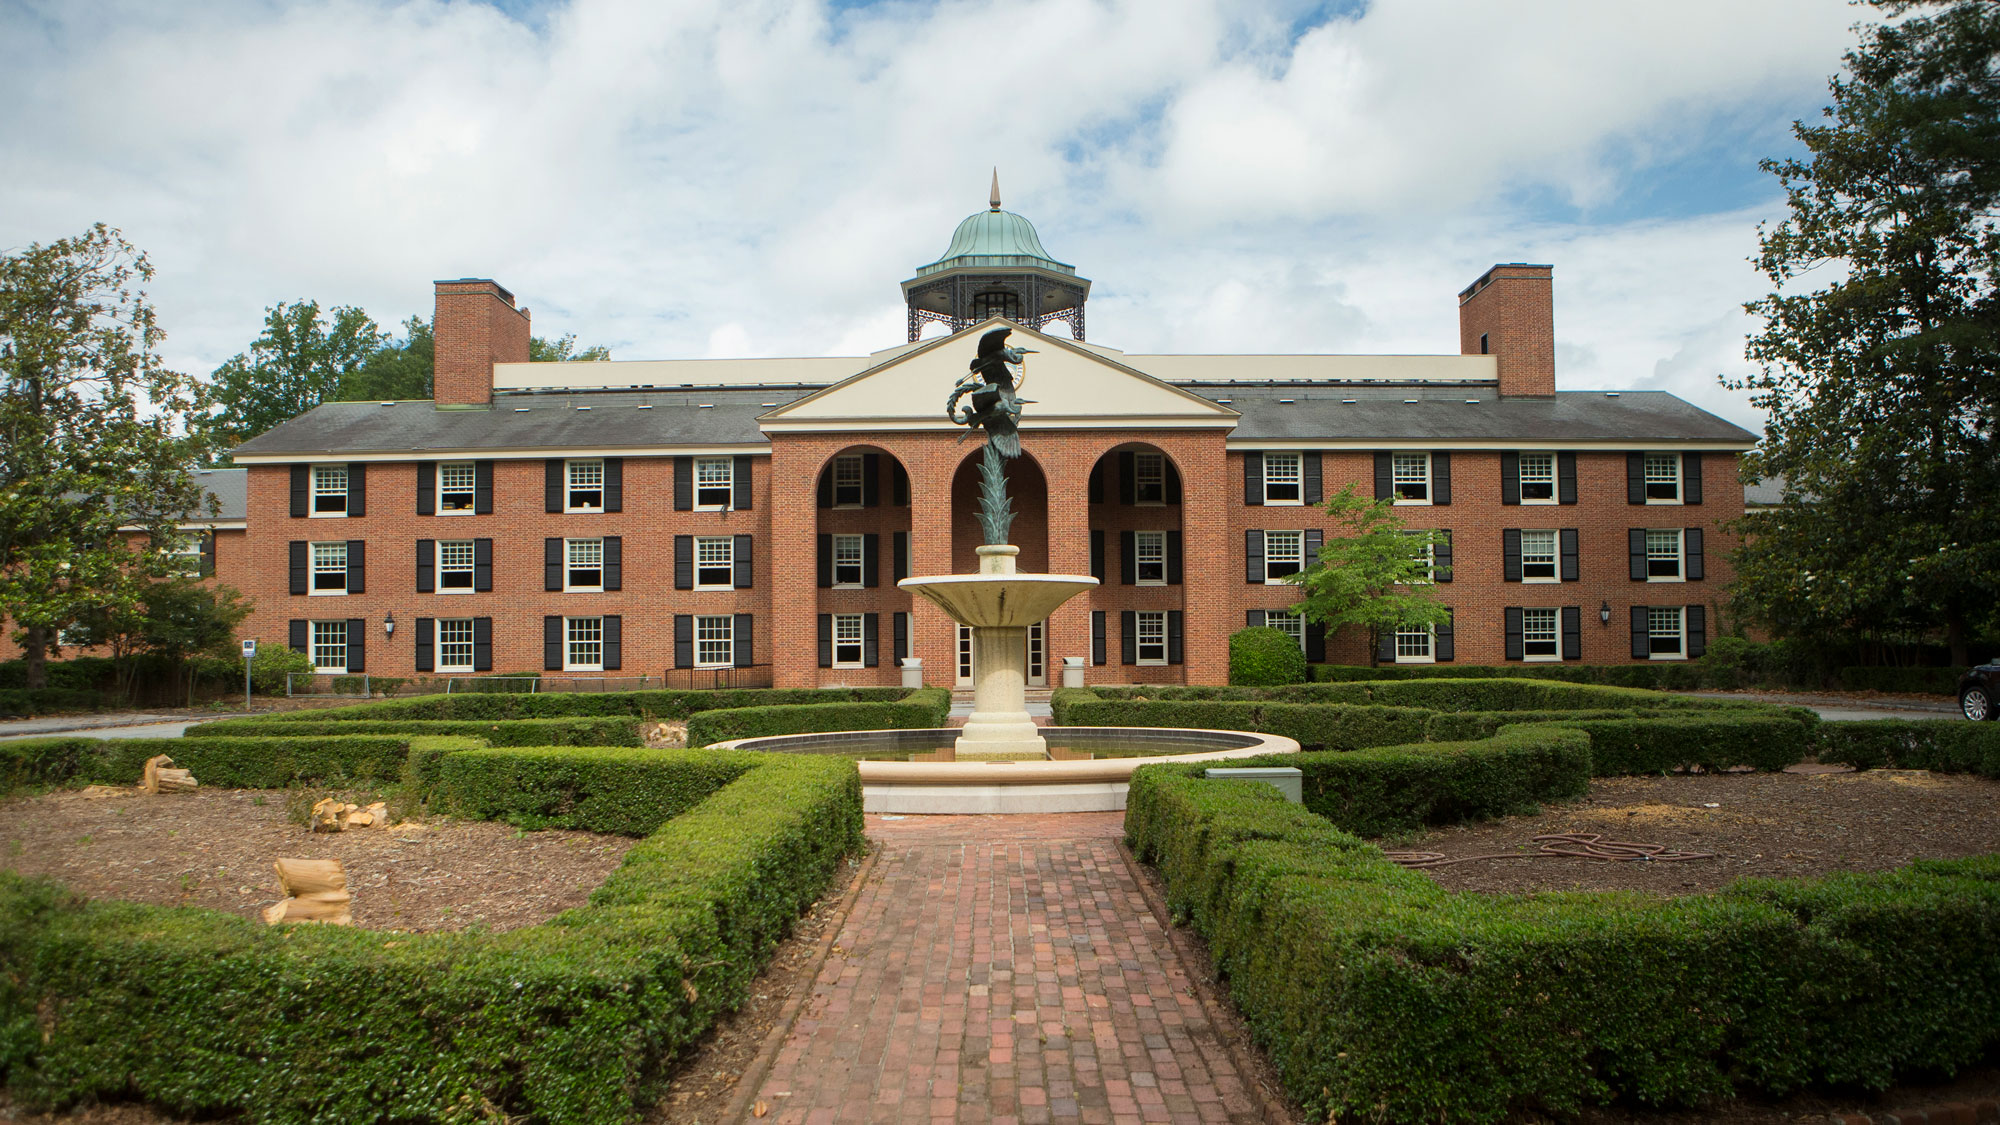 View of Lakeside building from the front, hedges and fountain as landscaping